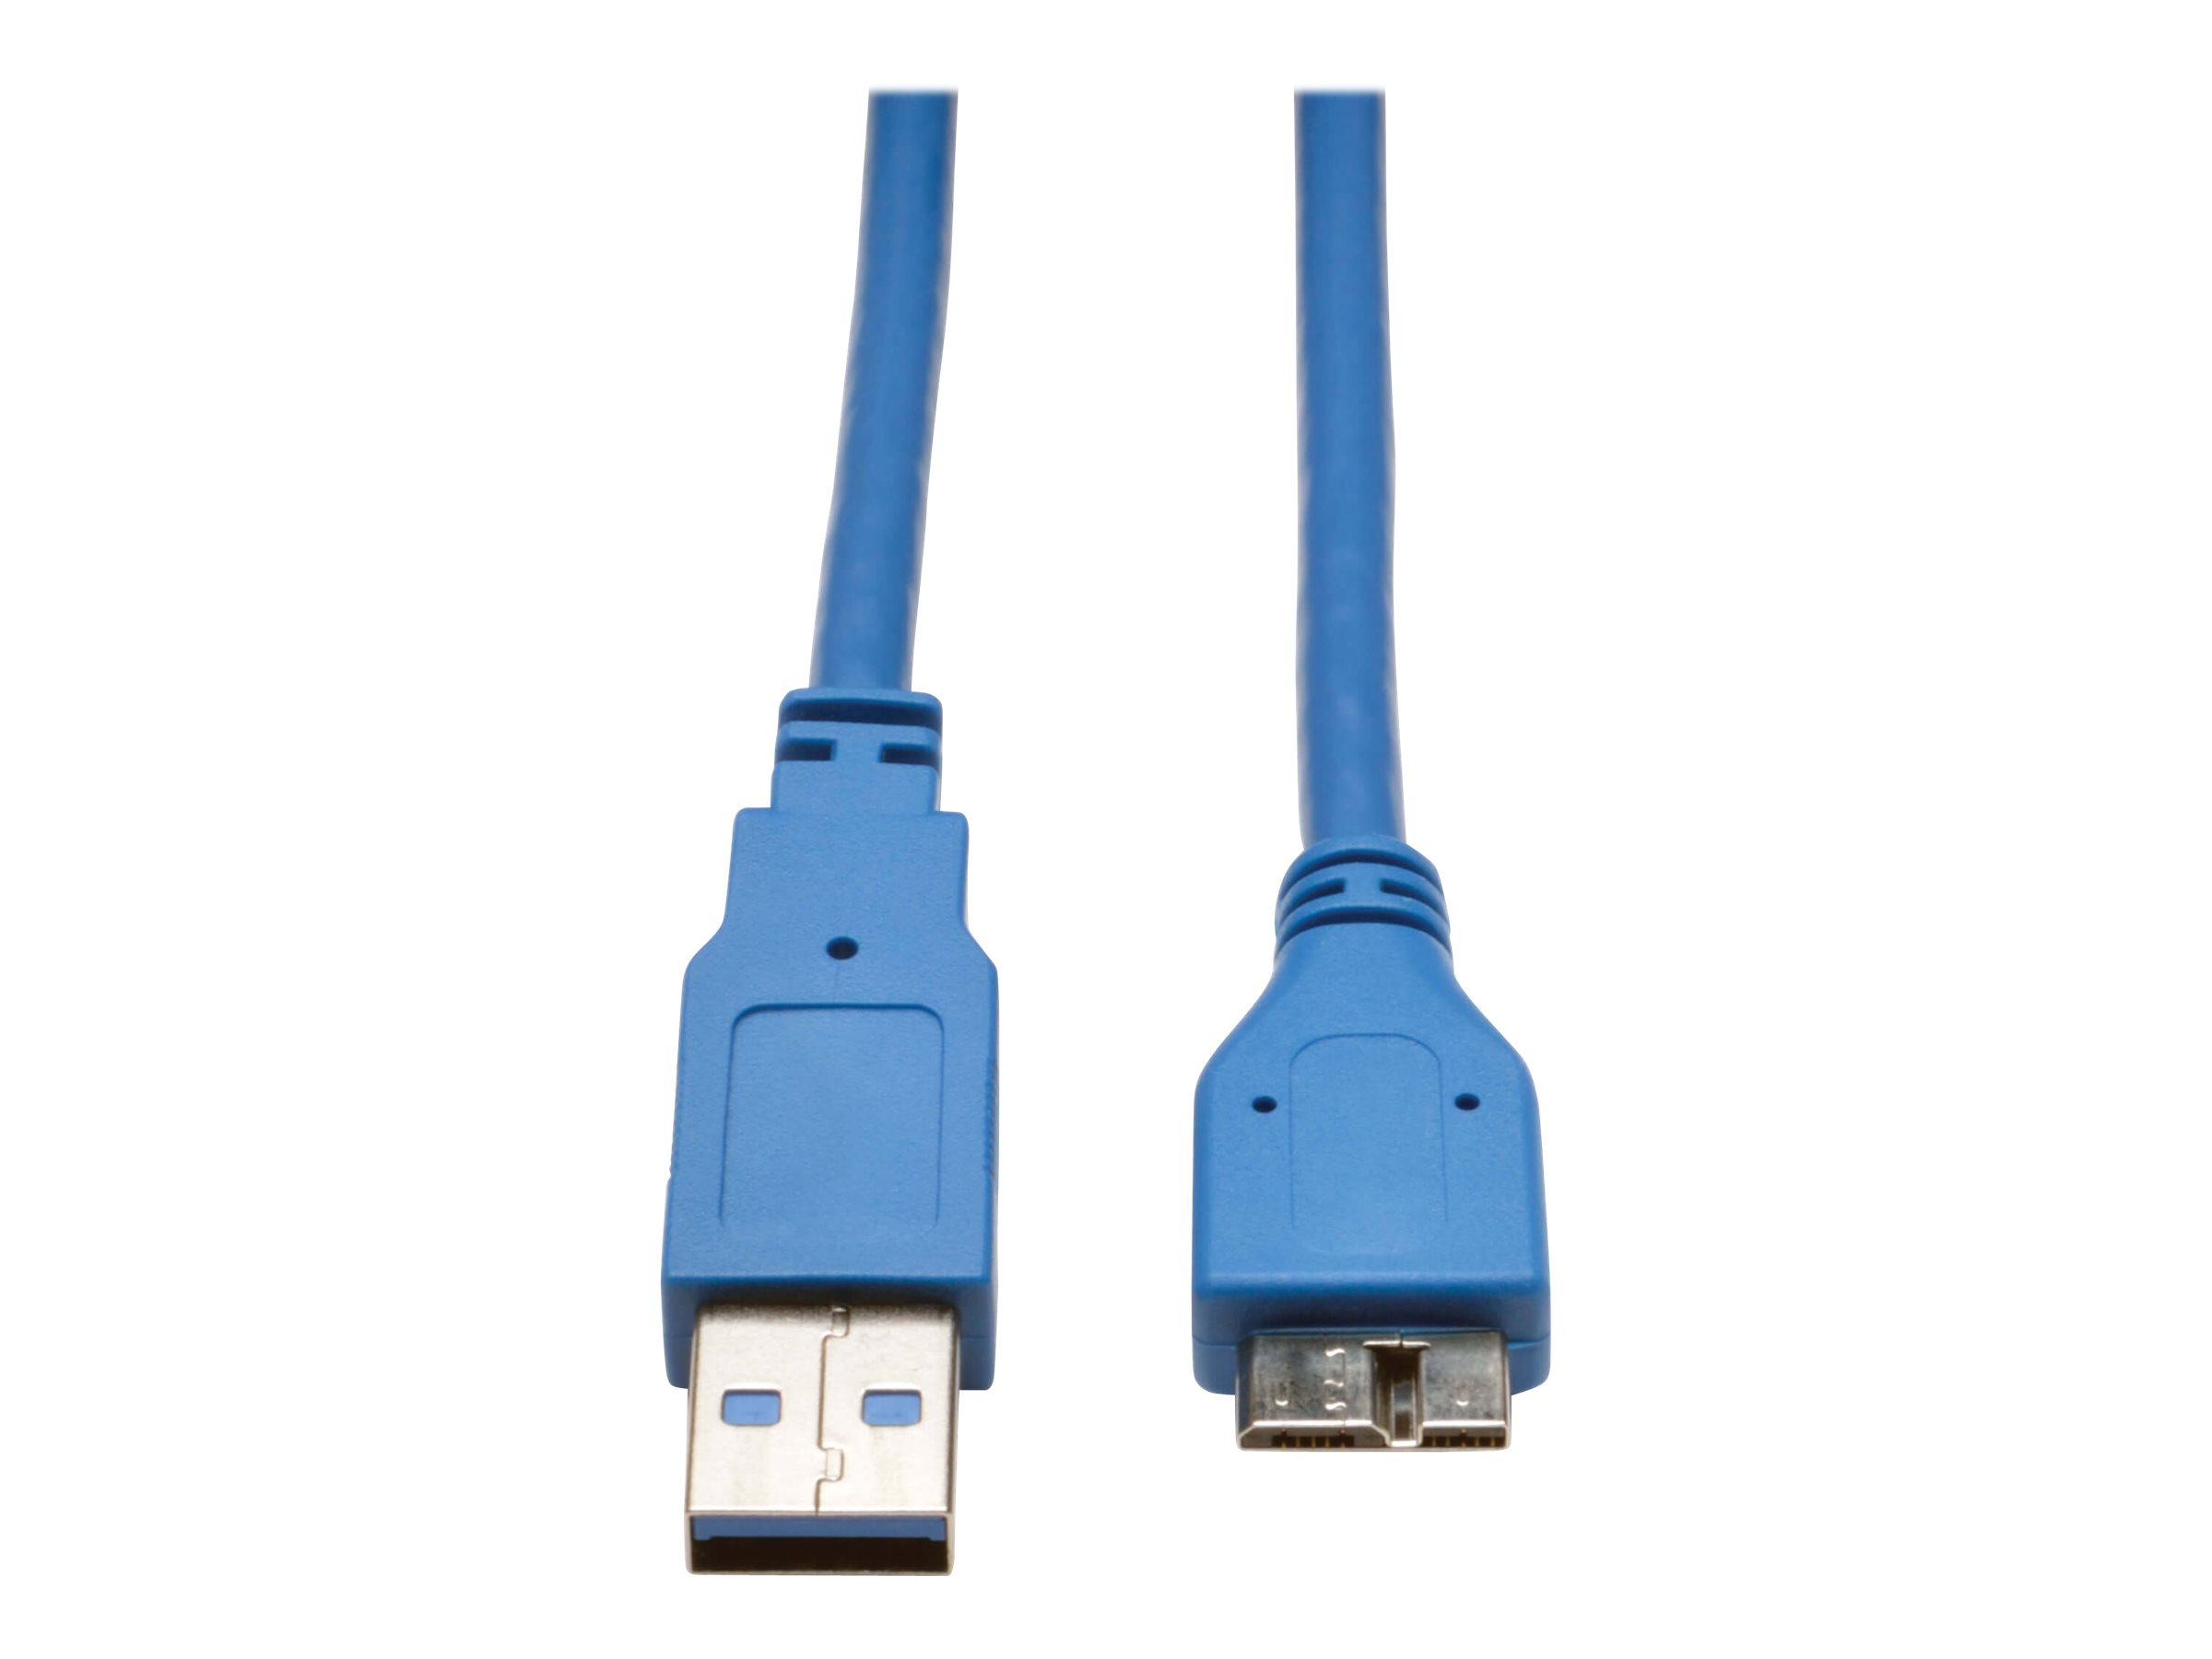 Eaton Tripp Lite Series USB 3.0 SuperSpeed Device Cable (A to Micro-B M/M), Blue, 3 ft. (0.91 m) - USB-Kabel - USB Typ A (M) zu 